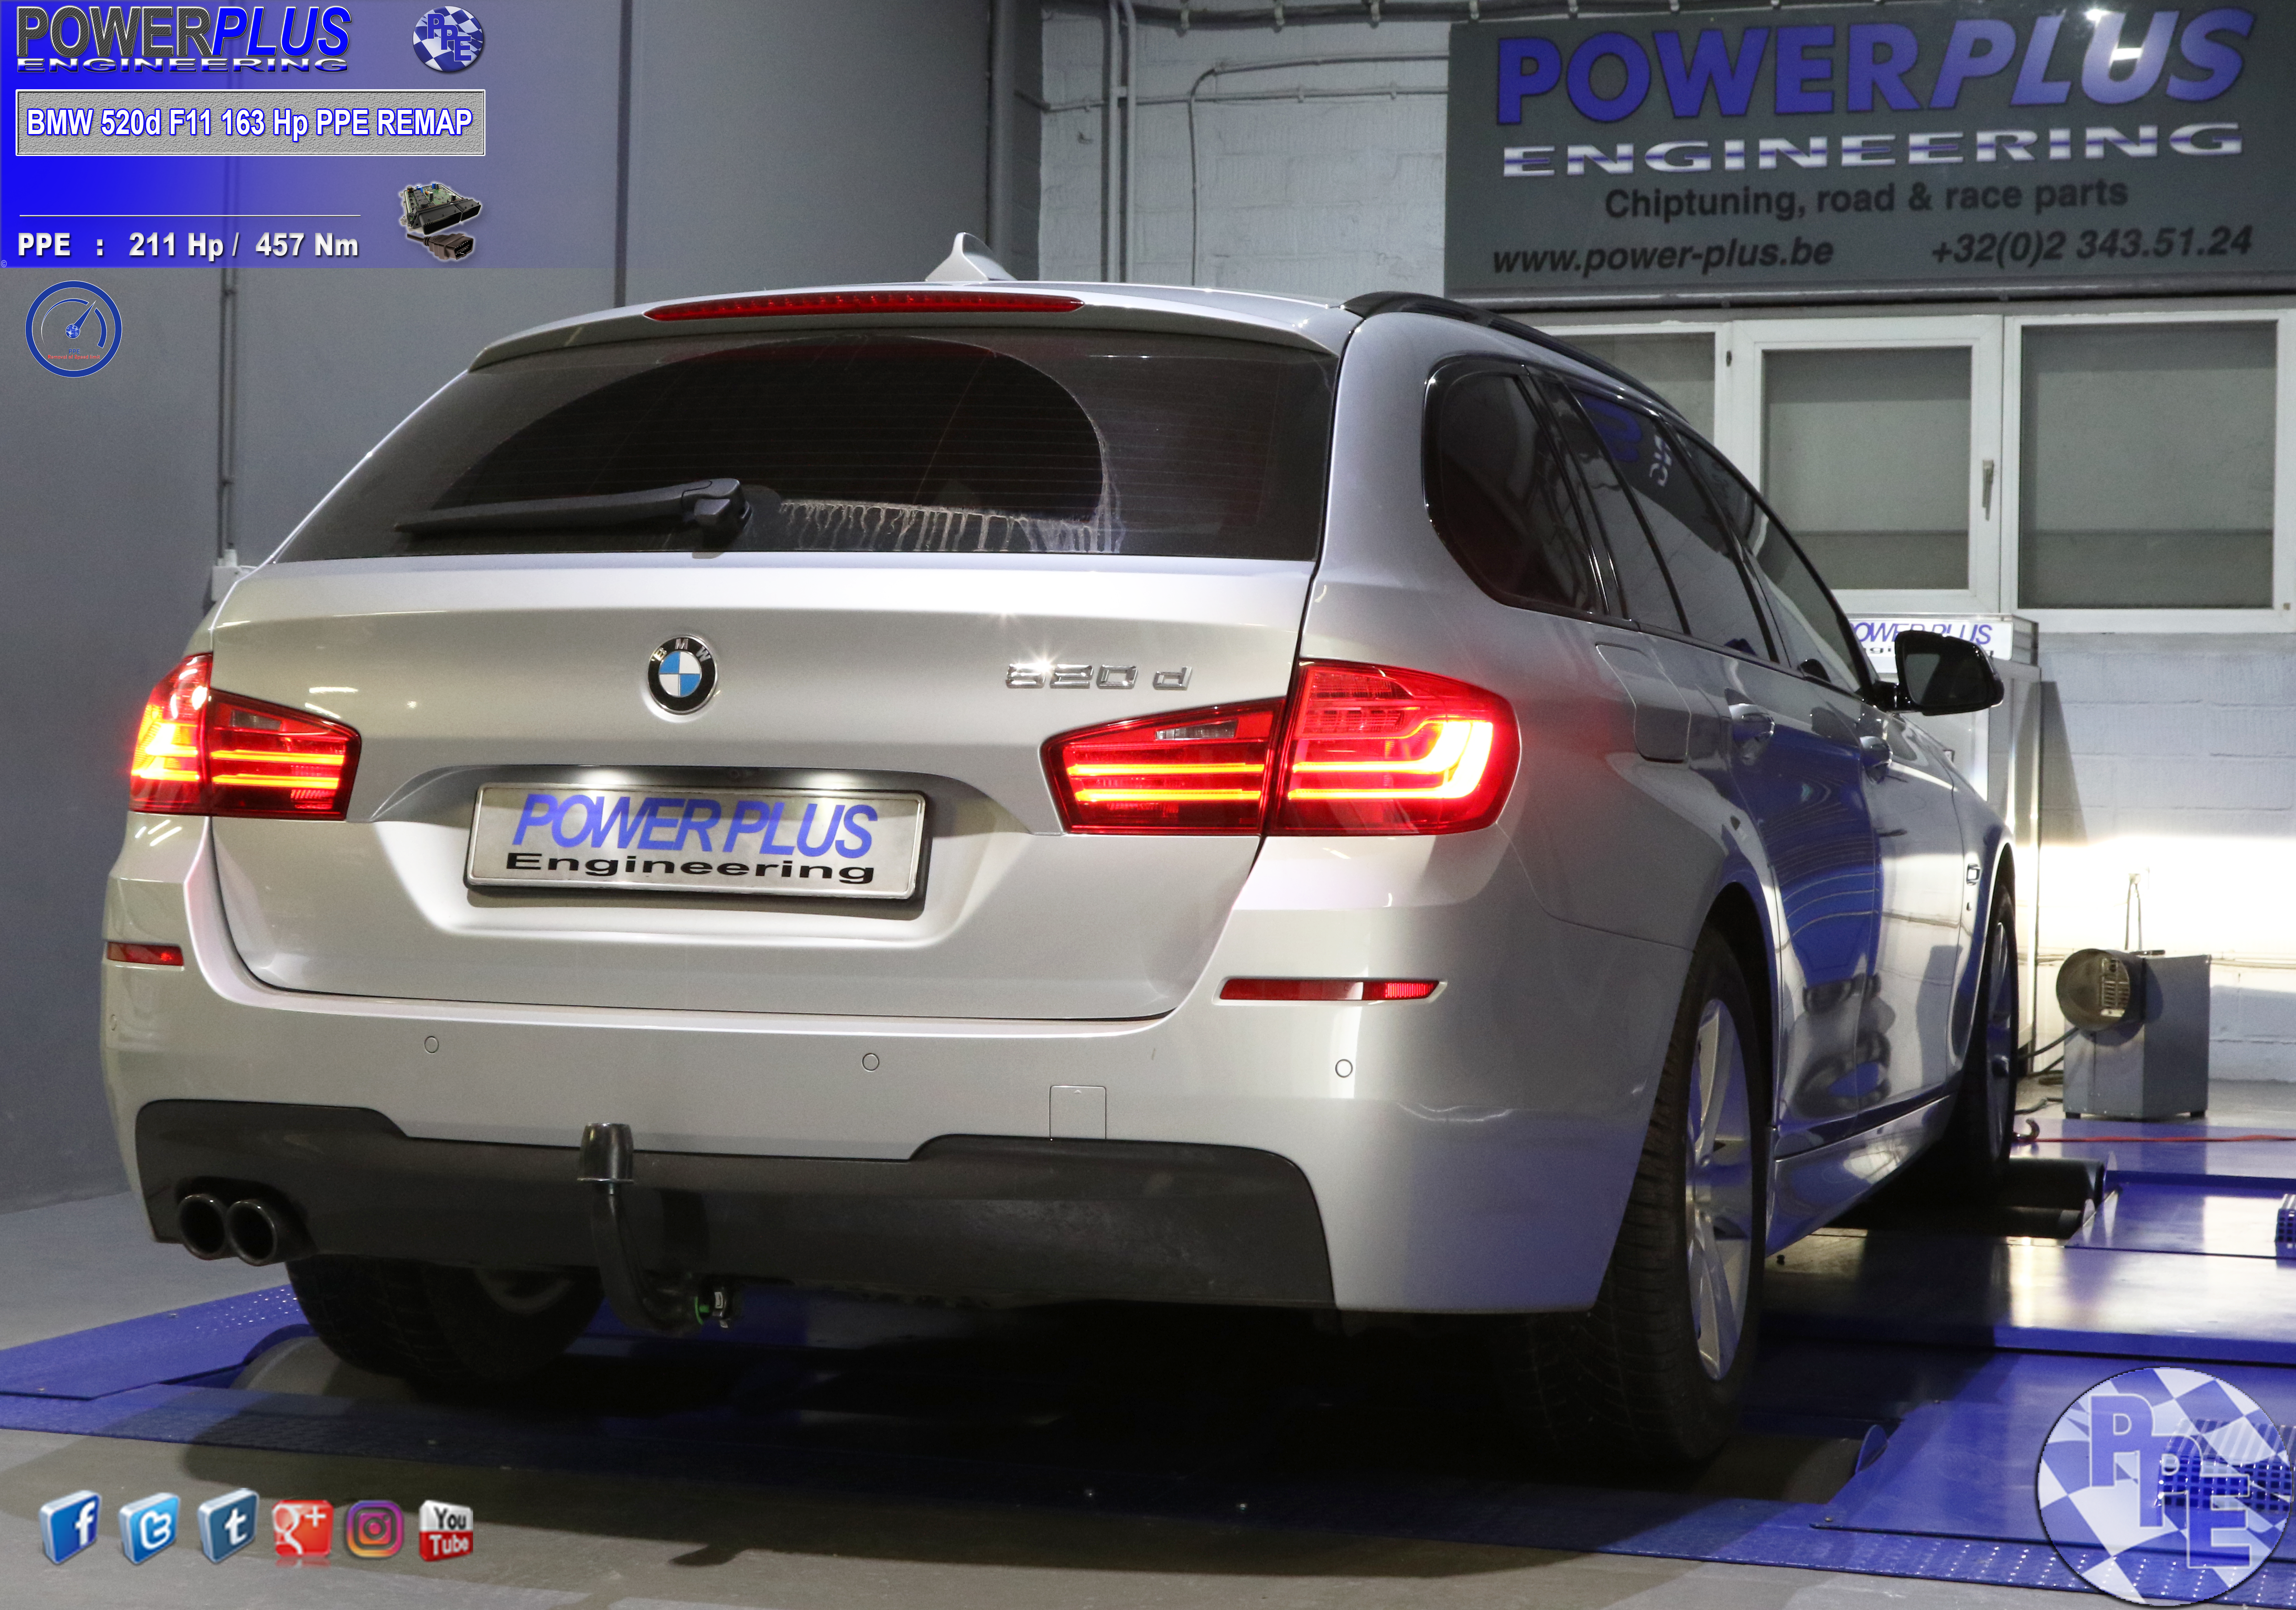 http://power-plus.be/site/wp-content/uploads/2017/01/BMW-520d-F11.png